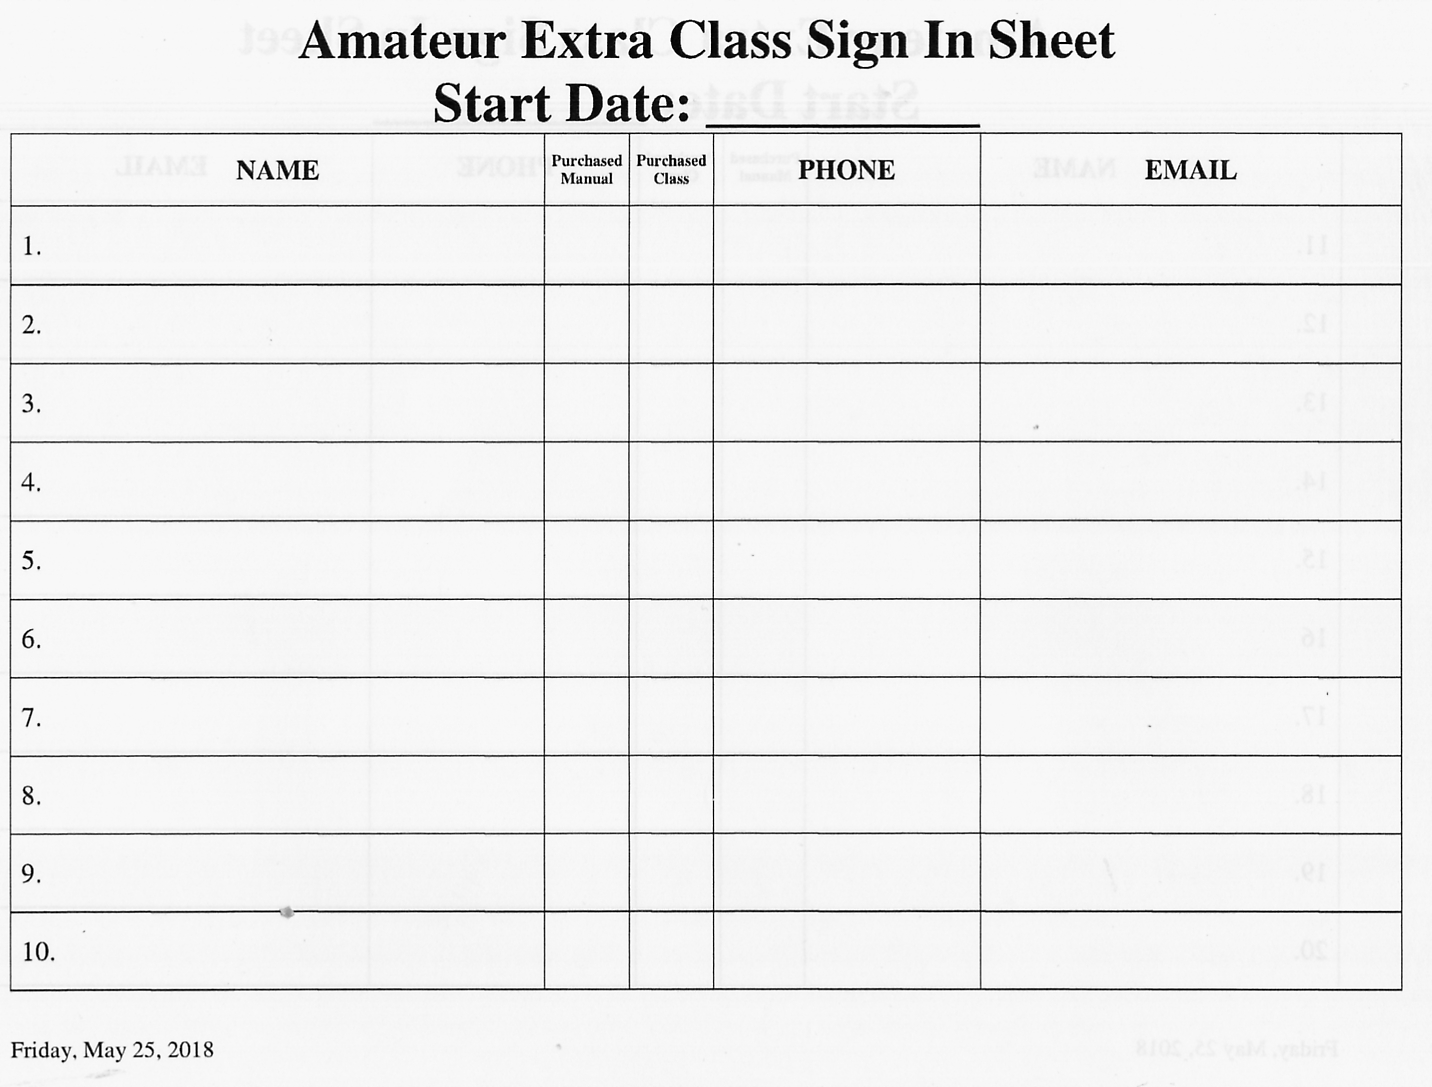 Extra Class License Sign In Sheet